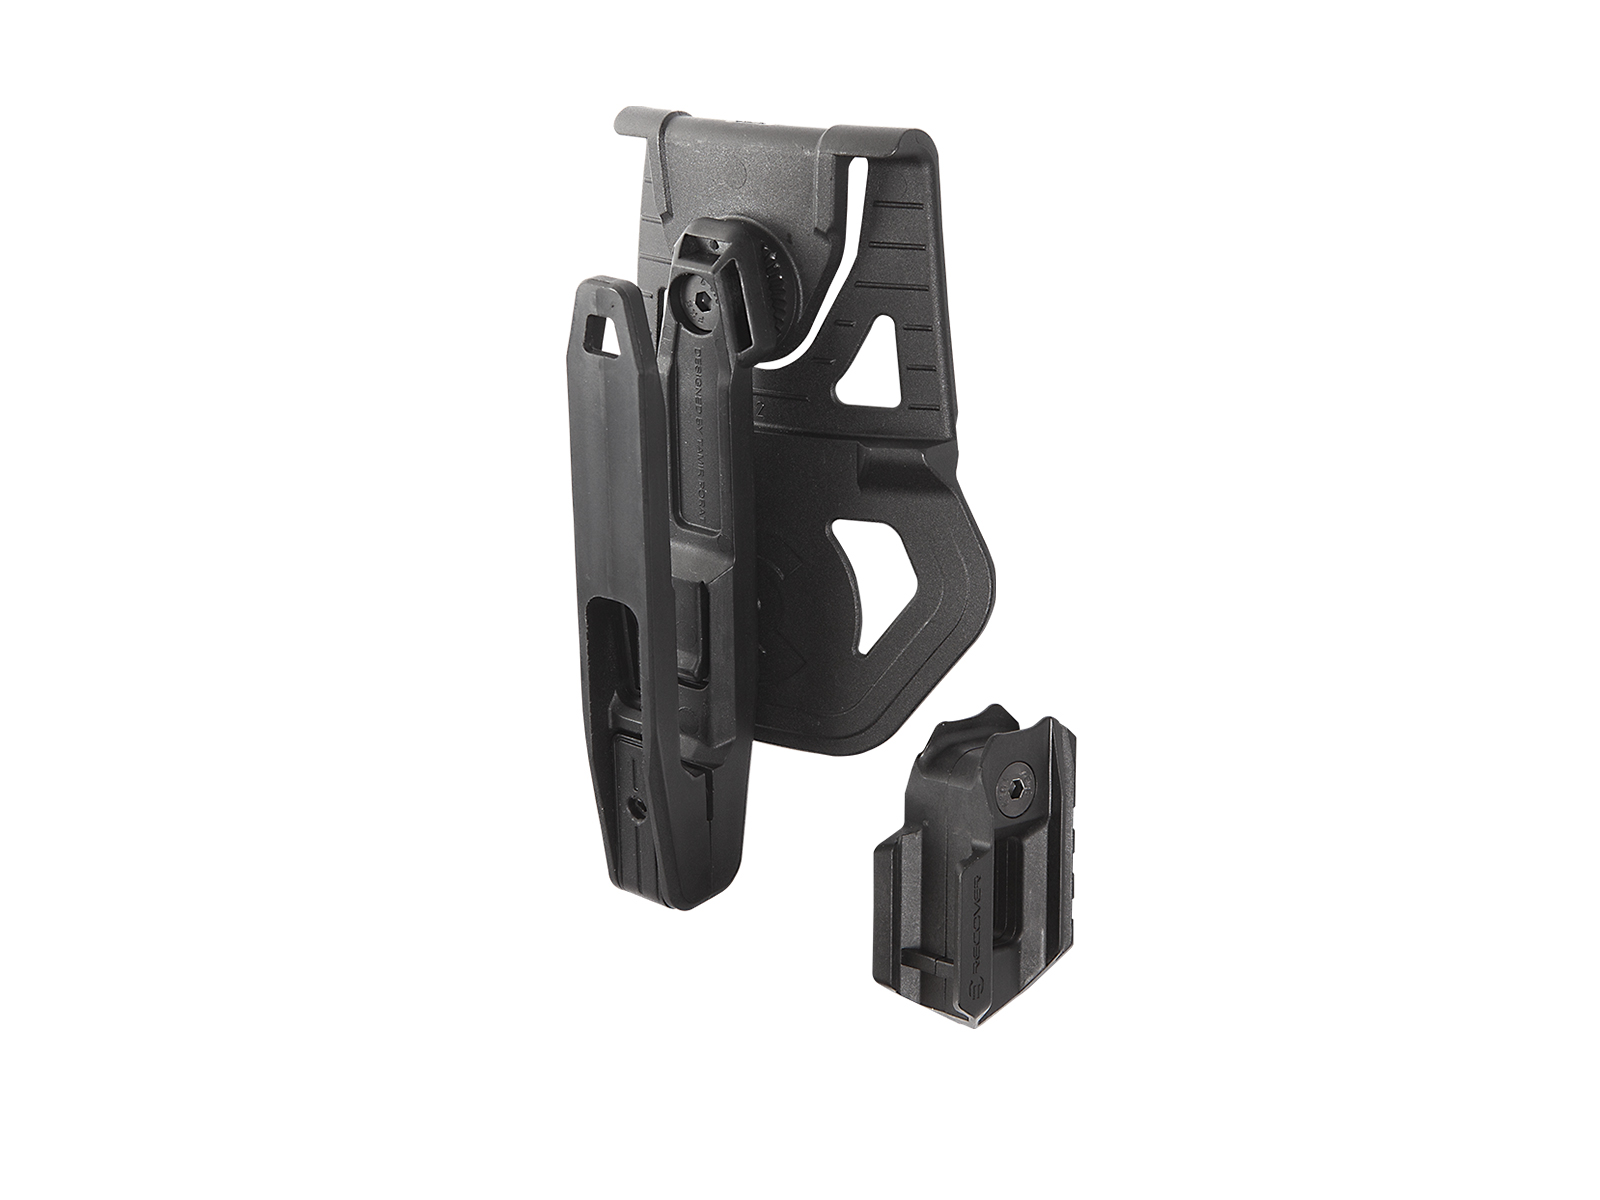 ASG Strike Systems Universal Holster